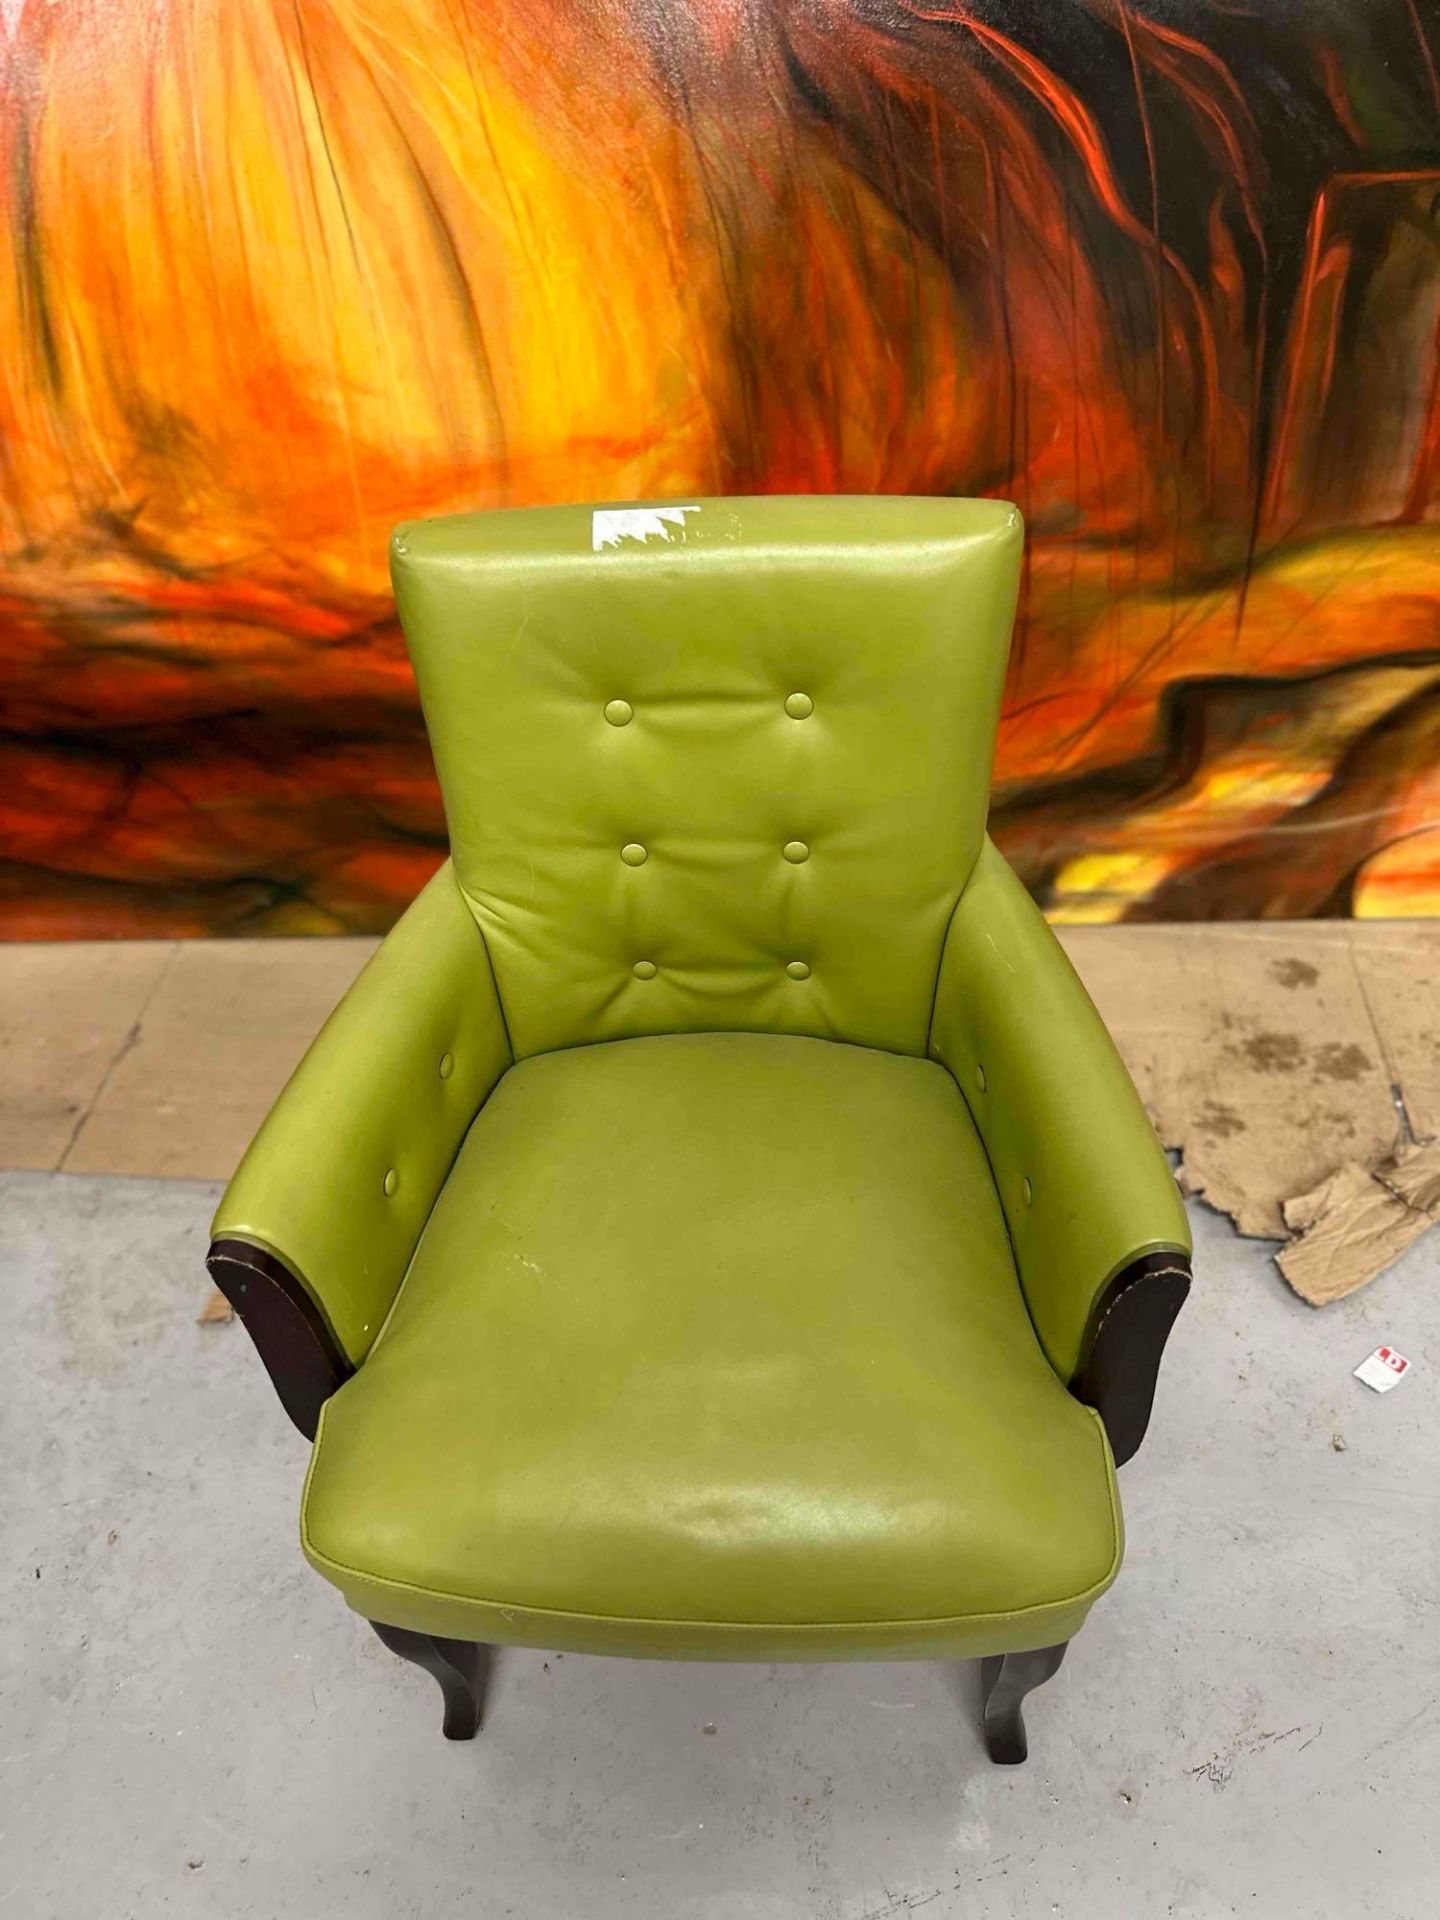 Colber International Lime Green Leather Armchair With Button Detail On Wooden Frame Enjoy - Image 2 of 5